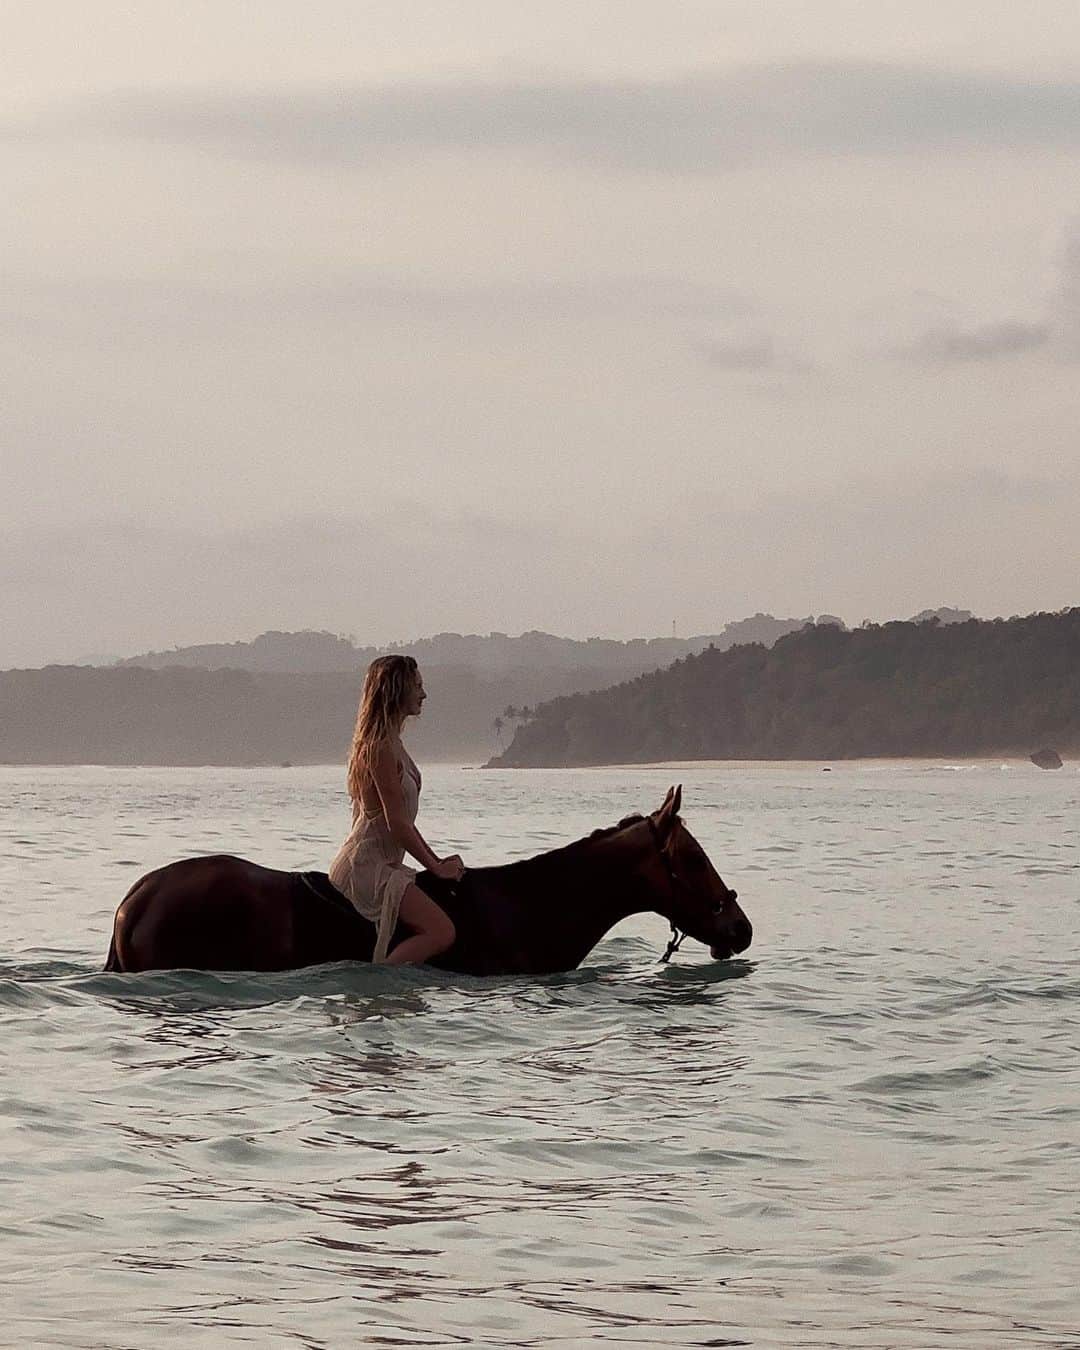 ニオミ・スマートのインスタグラム：「Connecting with Elton 🐴. I was told before meeting Elton that he can be an unsociable and introverted horse, and nervous at times. I have little experience with horses, but I decided to take some time before the walk on the beach to get to know this magnificent being. I was feeling a little nervous too.   I spoke softly in his ear that I understood, that I’m also a bit of an introvert, and it’s ok if he wants to stay in the stables but if he chooses to join me we can stop at any point. Thankfully he forgave me for mistaking his name for Elvis…   Elton chose to join me for a walk along the beach and even a swim in the sea - I was surprised how eager he was to immerse himself into the water 🌊.  We stayed in the water for a peaceful few moments, with him nuzzling his nose into me whenever I paused from stoking his nose and ears. We shared a few secrets and stories too ✨.   Honestly, this was one of the most heartwarming encounters with an animal I have experienced. I may be completely wrong and sugarcoating the whole thing, but it felt like taking that moment to connect and bond before taking part in this experience made a world of a difference to both Elton and myself to put us both at ease.   I don’t know whether animals can understand our words specifically, but they most certainly feel the energy of our presence and vibration of our voice.   Animals are truly a gift. The bond we can form with them feels so pure, like unconditional love. 🤍  Thank you to @nihi for this memorable experience.」